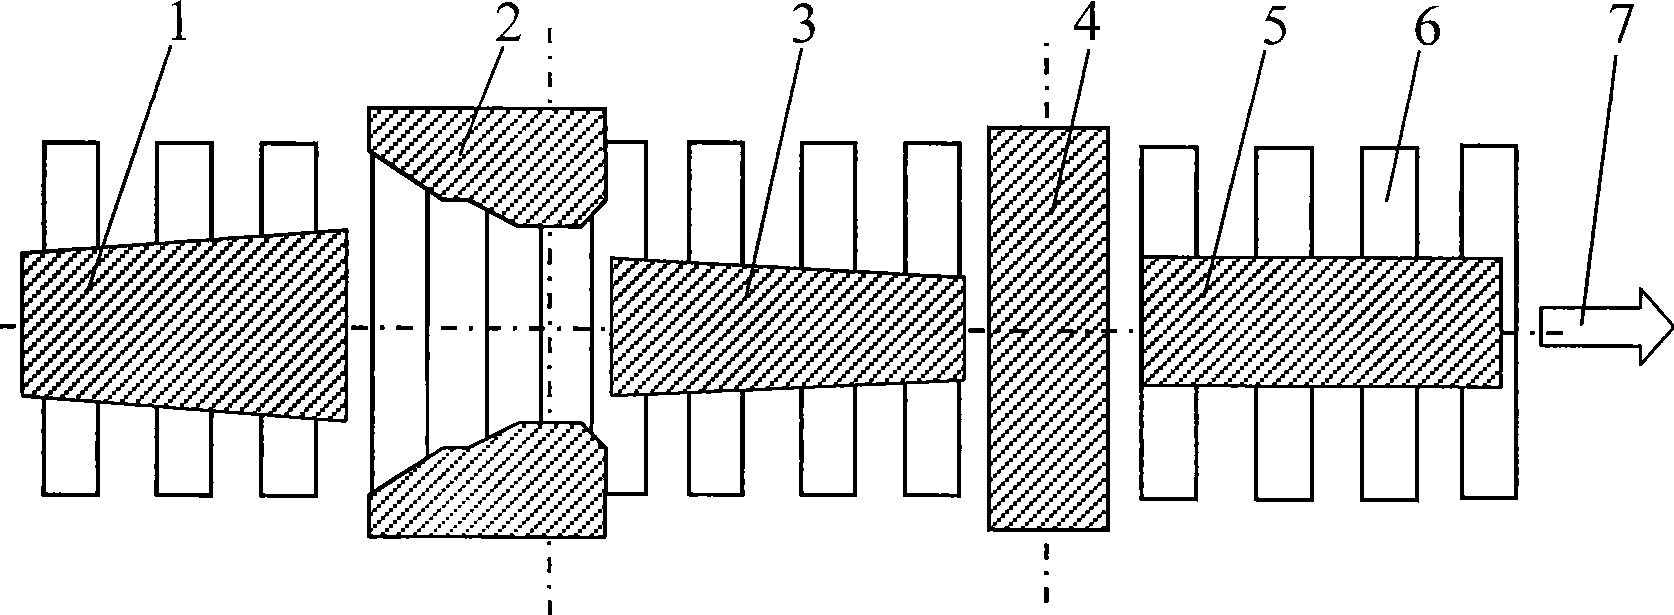 Control method for producing conical plate blank using side compression machine of fixed width plate blank